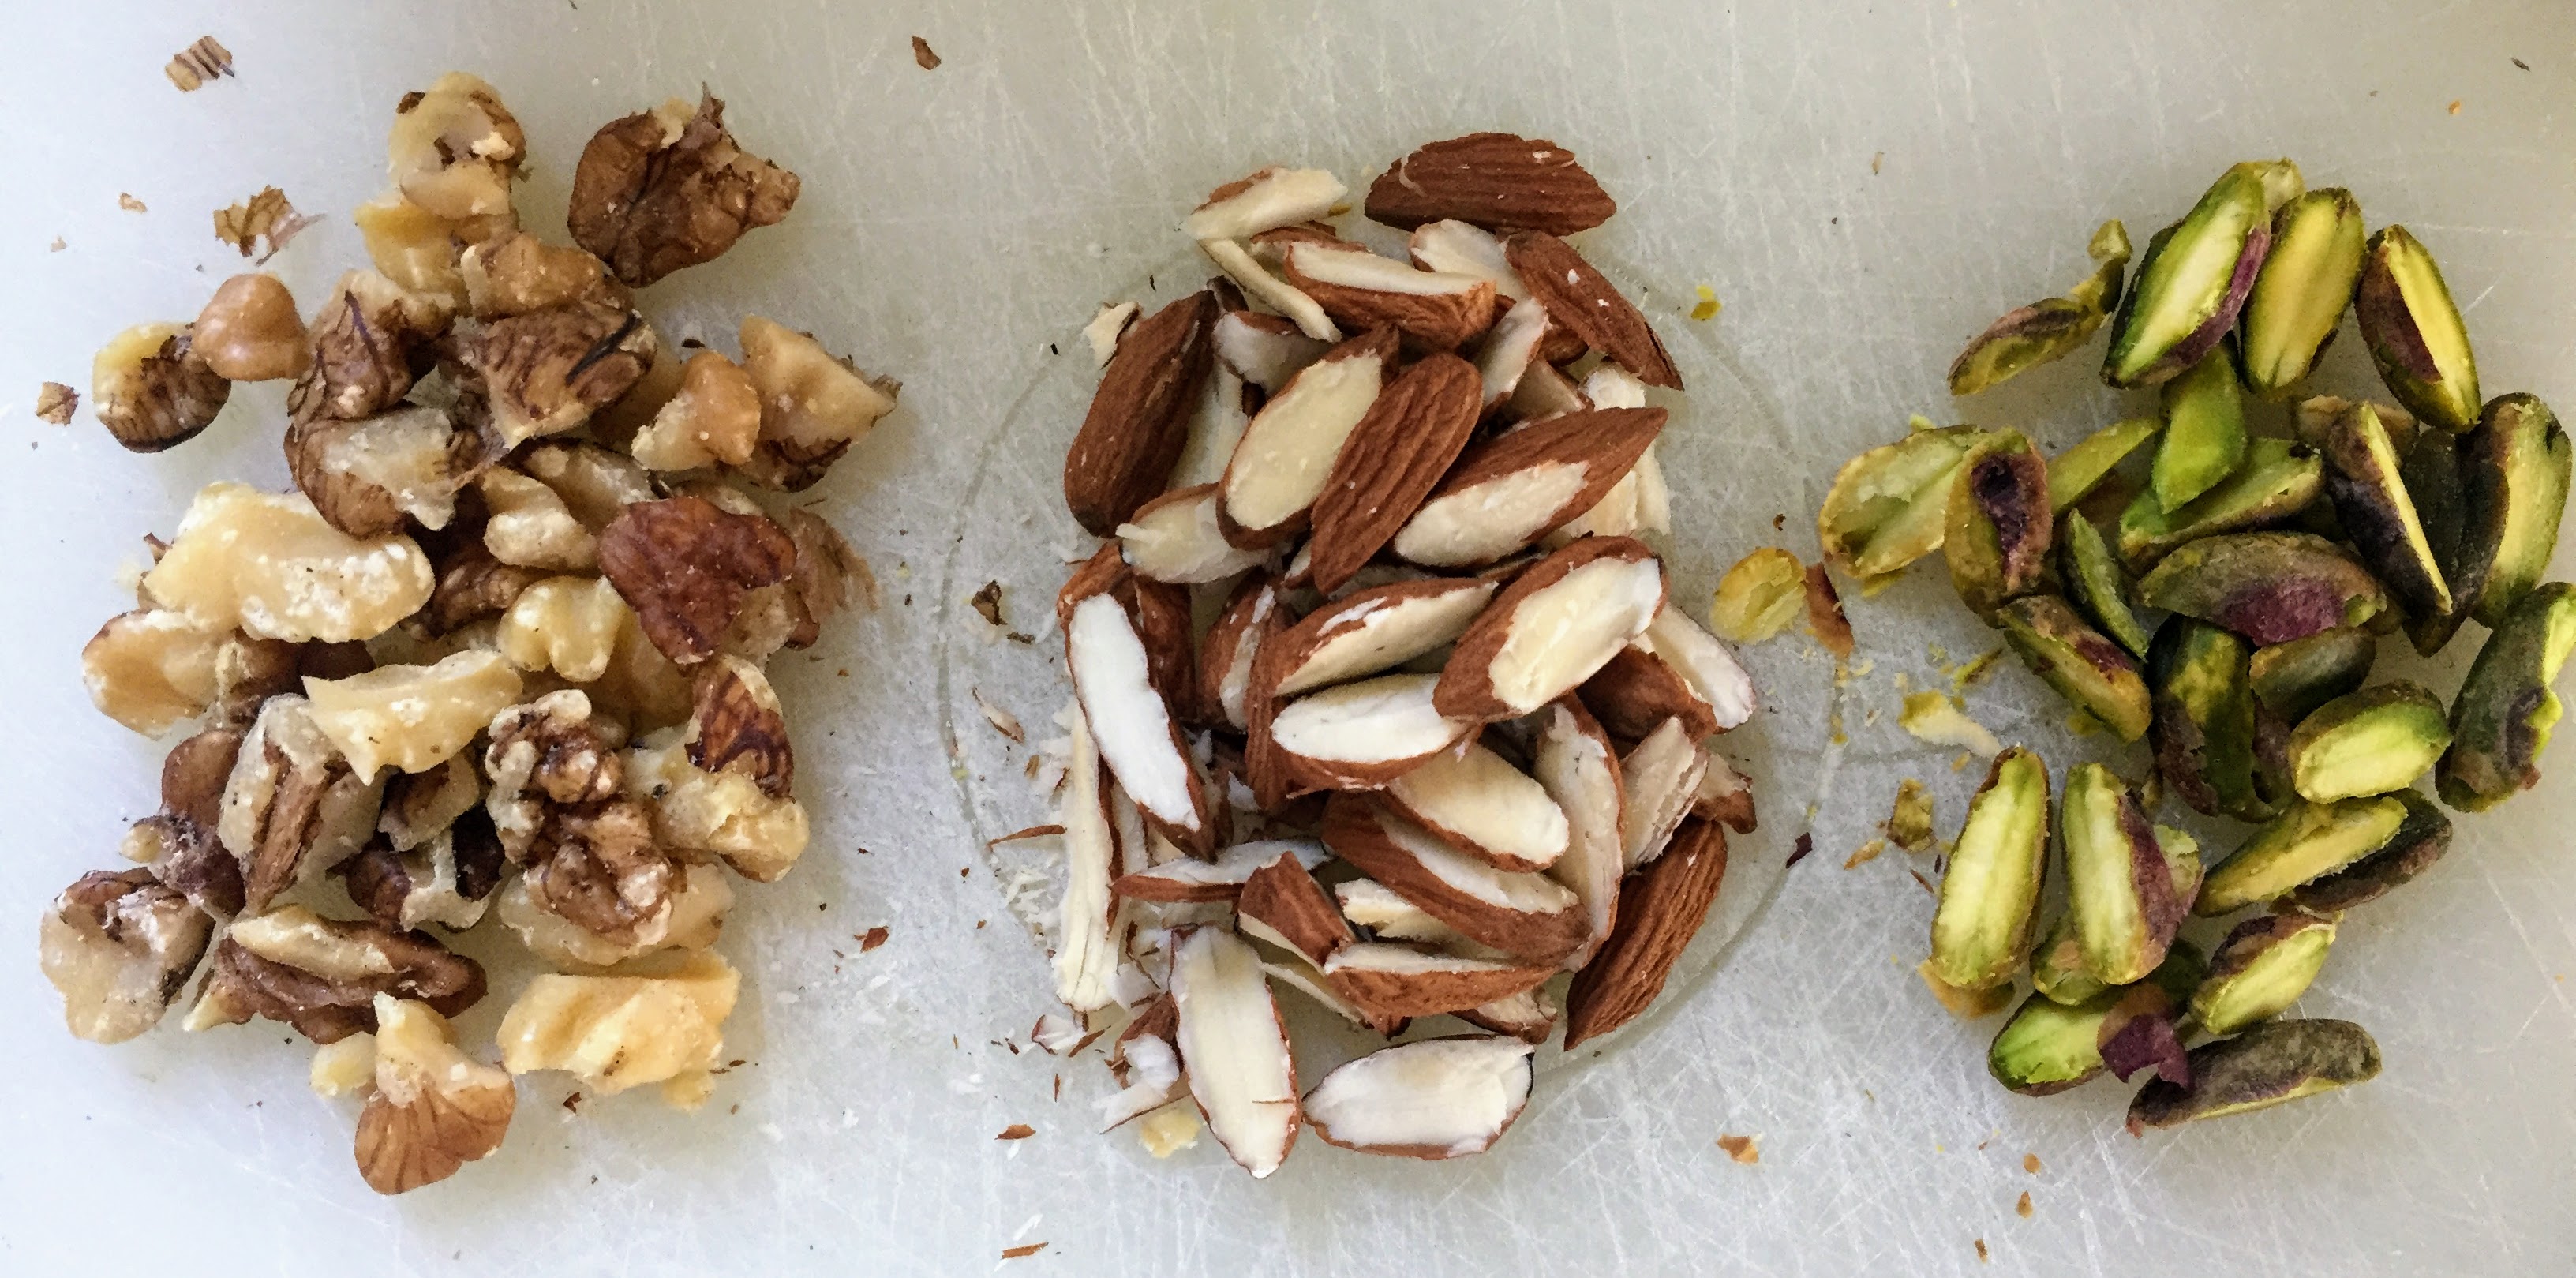 Three small piles of chopped walnuts, slivered almonds, and halved pistachios.